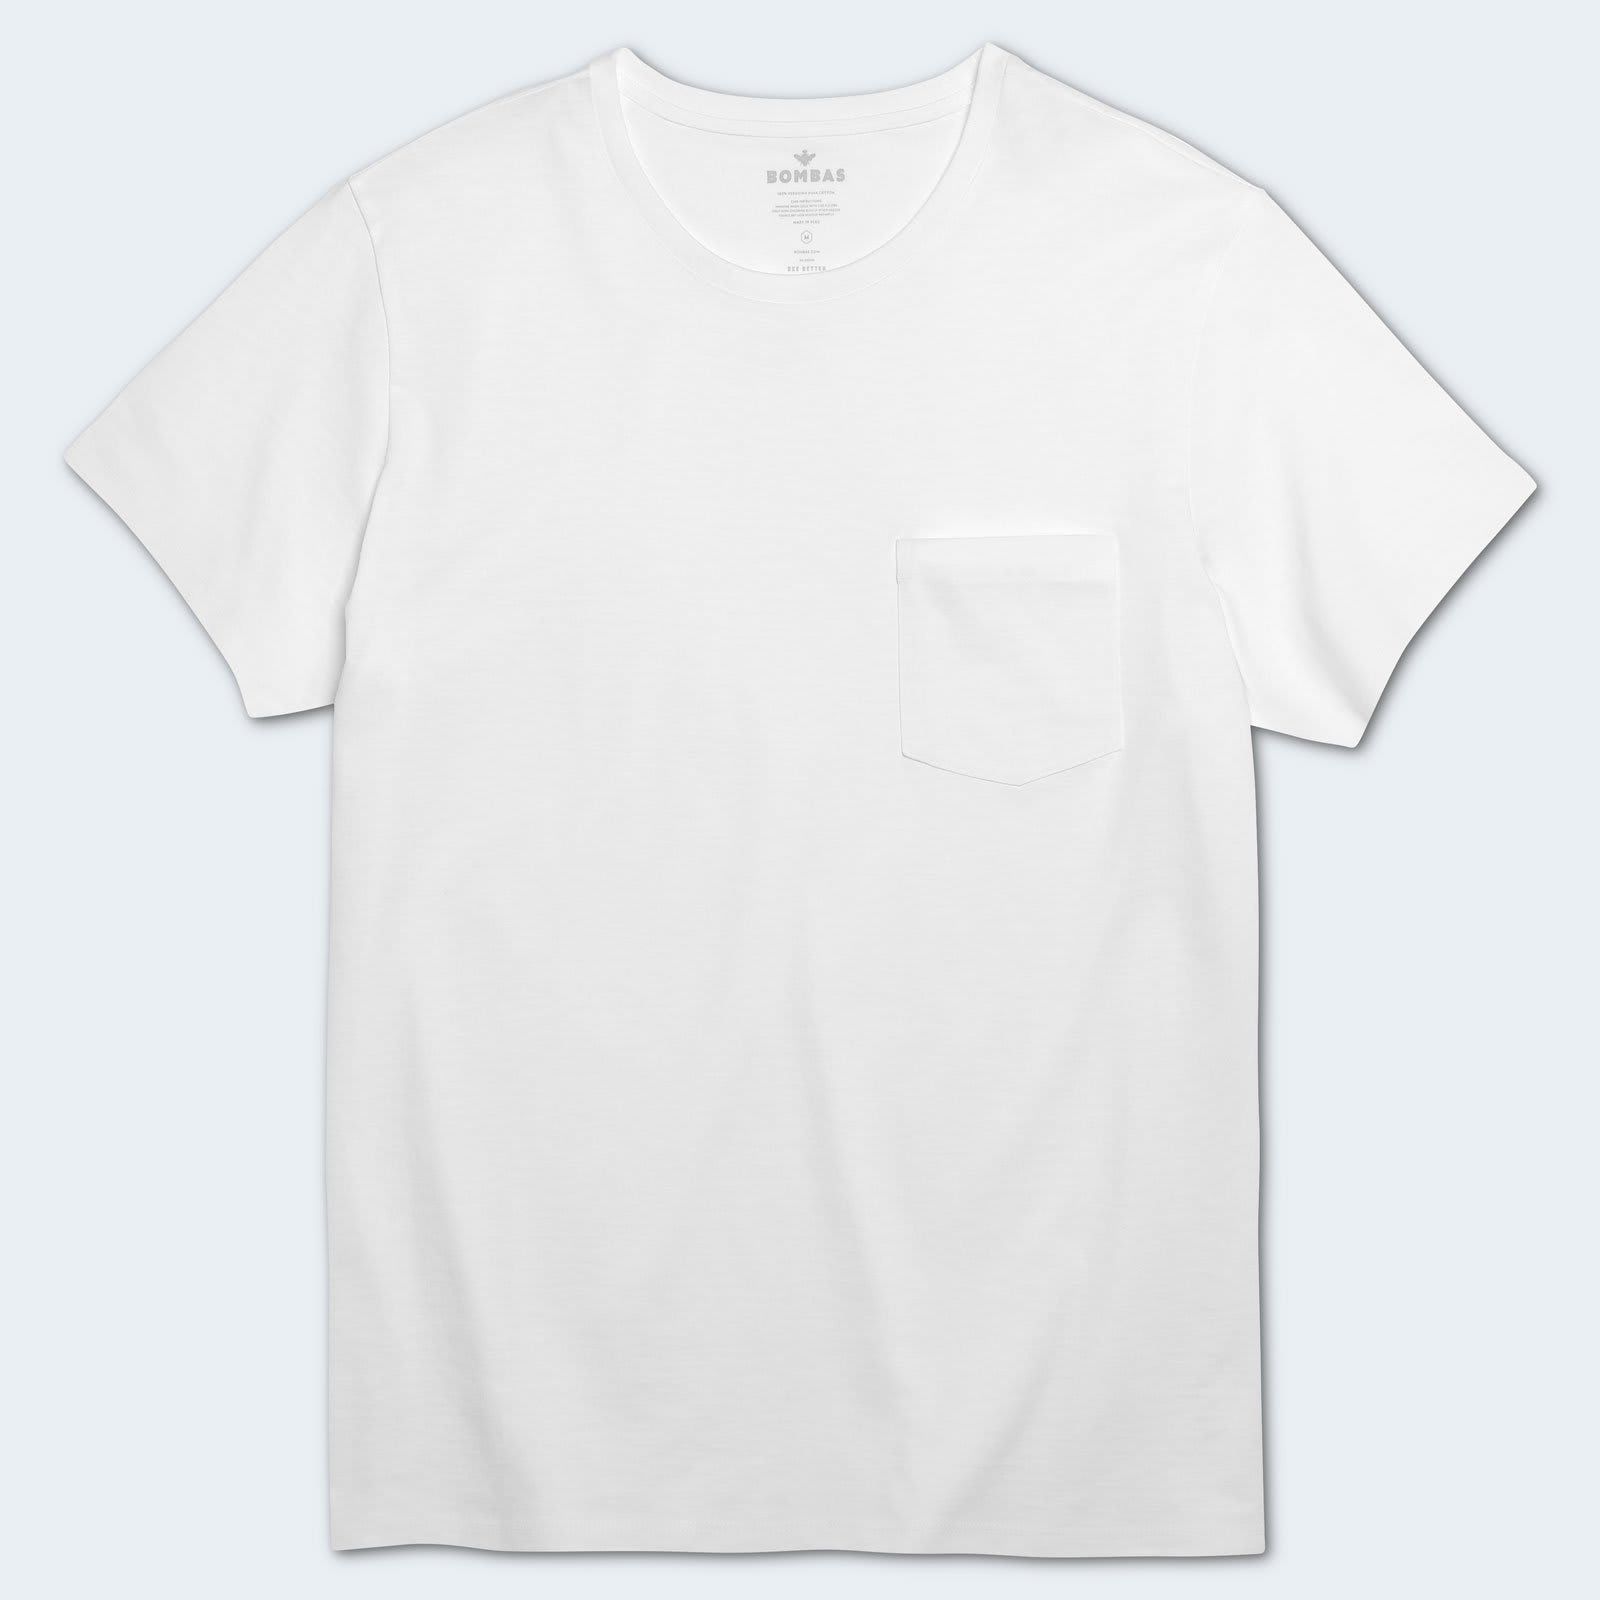 15 Best White T-Shirts for Men 2021, According to Experts